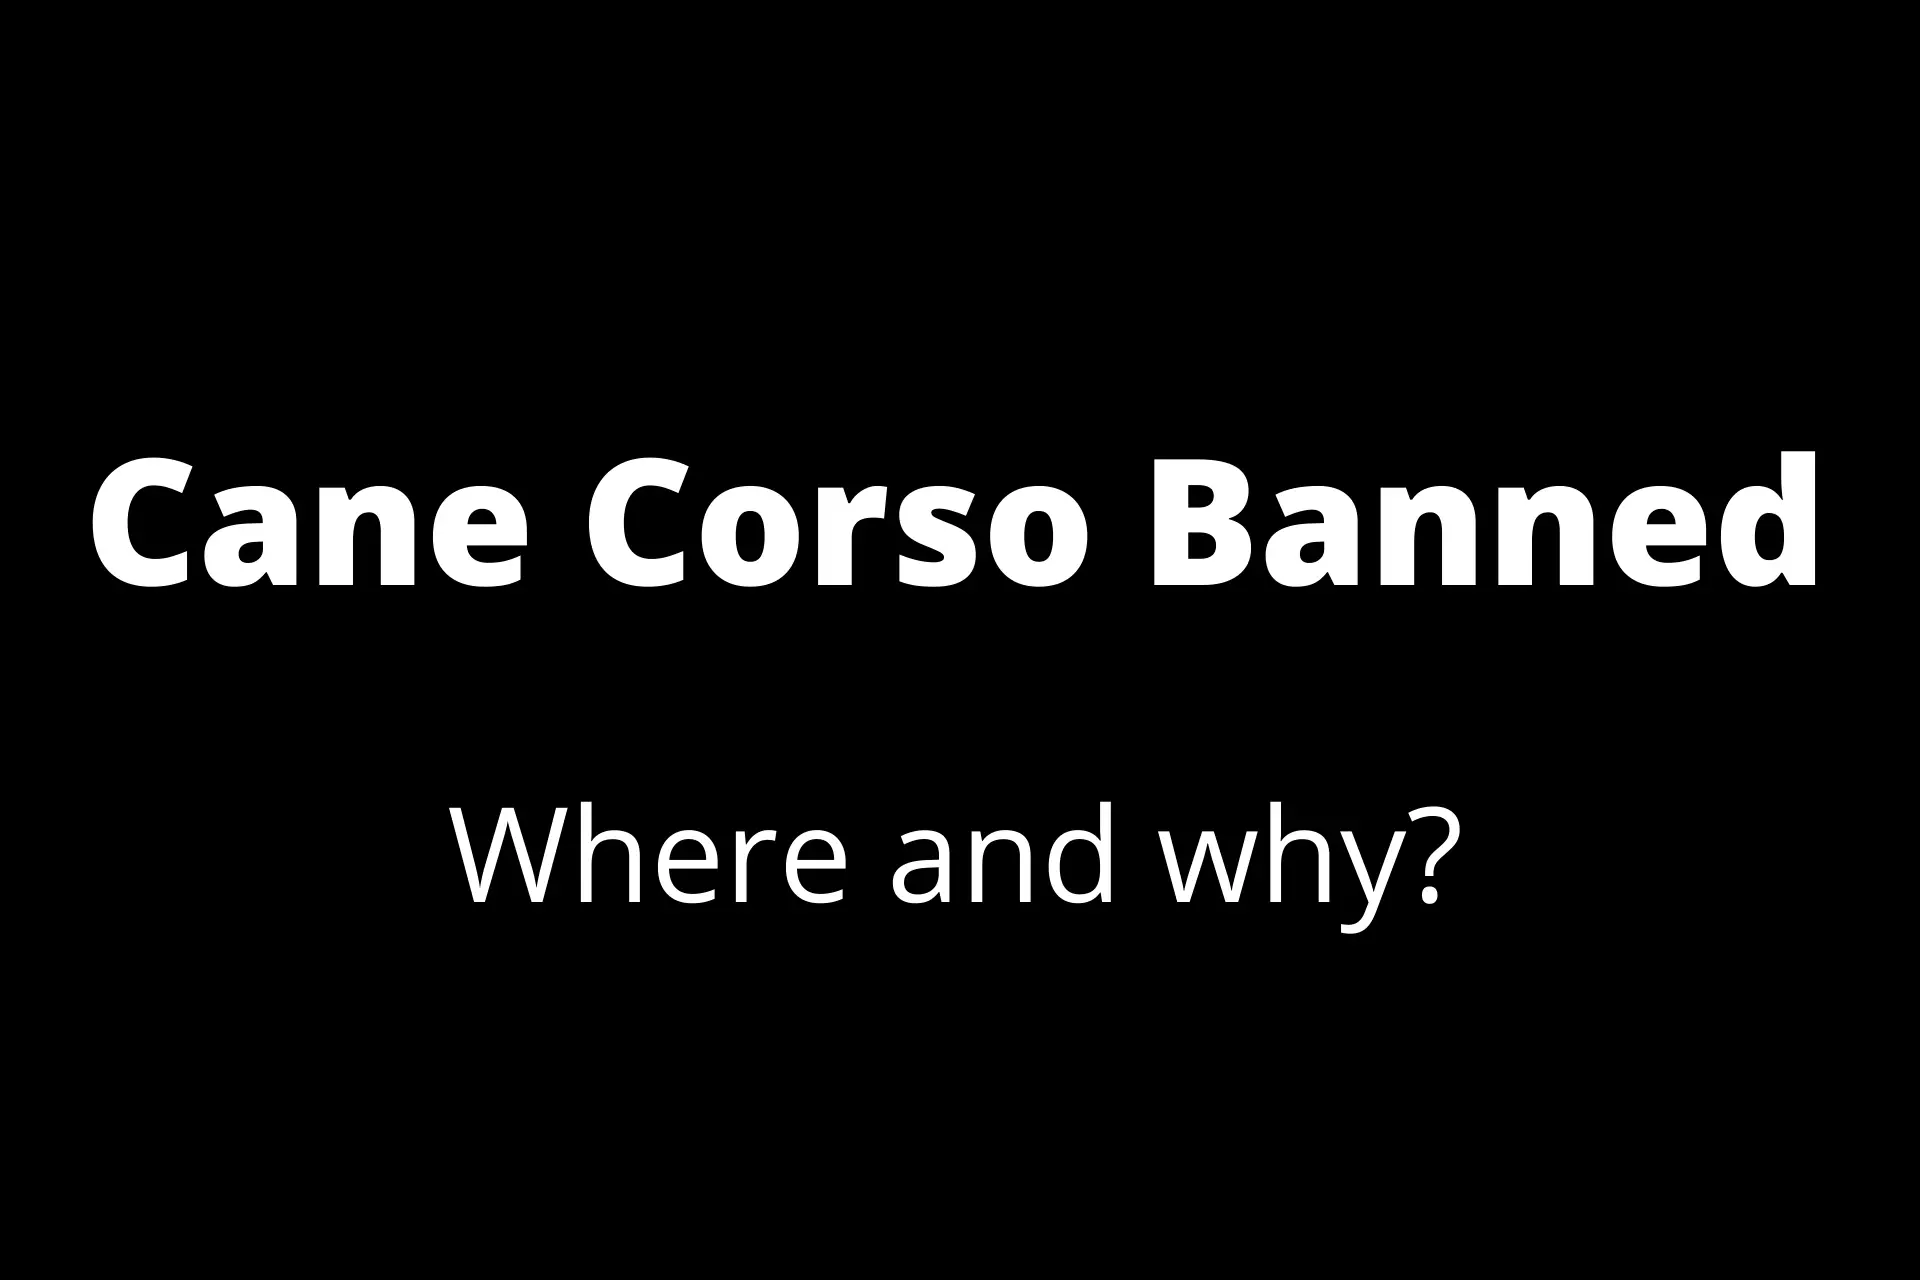 Cane Corso banned where and why